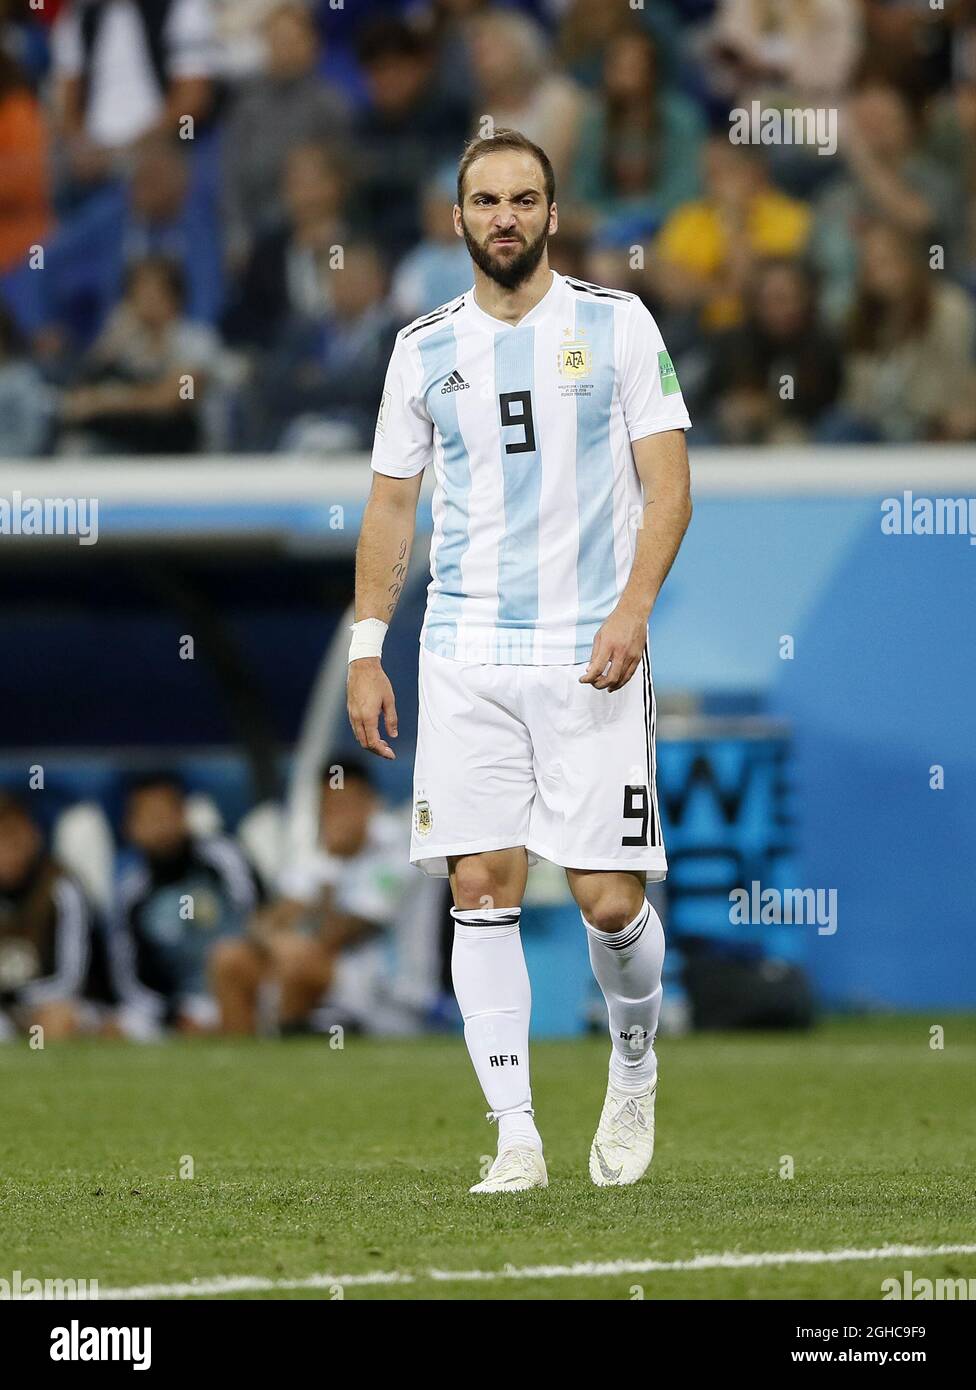 Argentina's Gonzalo Higuain in action during the FIFA World Cup 2018 Group D match at the Nizhny Novgorod Stadium, Nizhny Novgorod. Picture date 21st June 2018. Picture credit should read: David Klein/Sportimage via PA Images Stock Photo